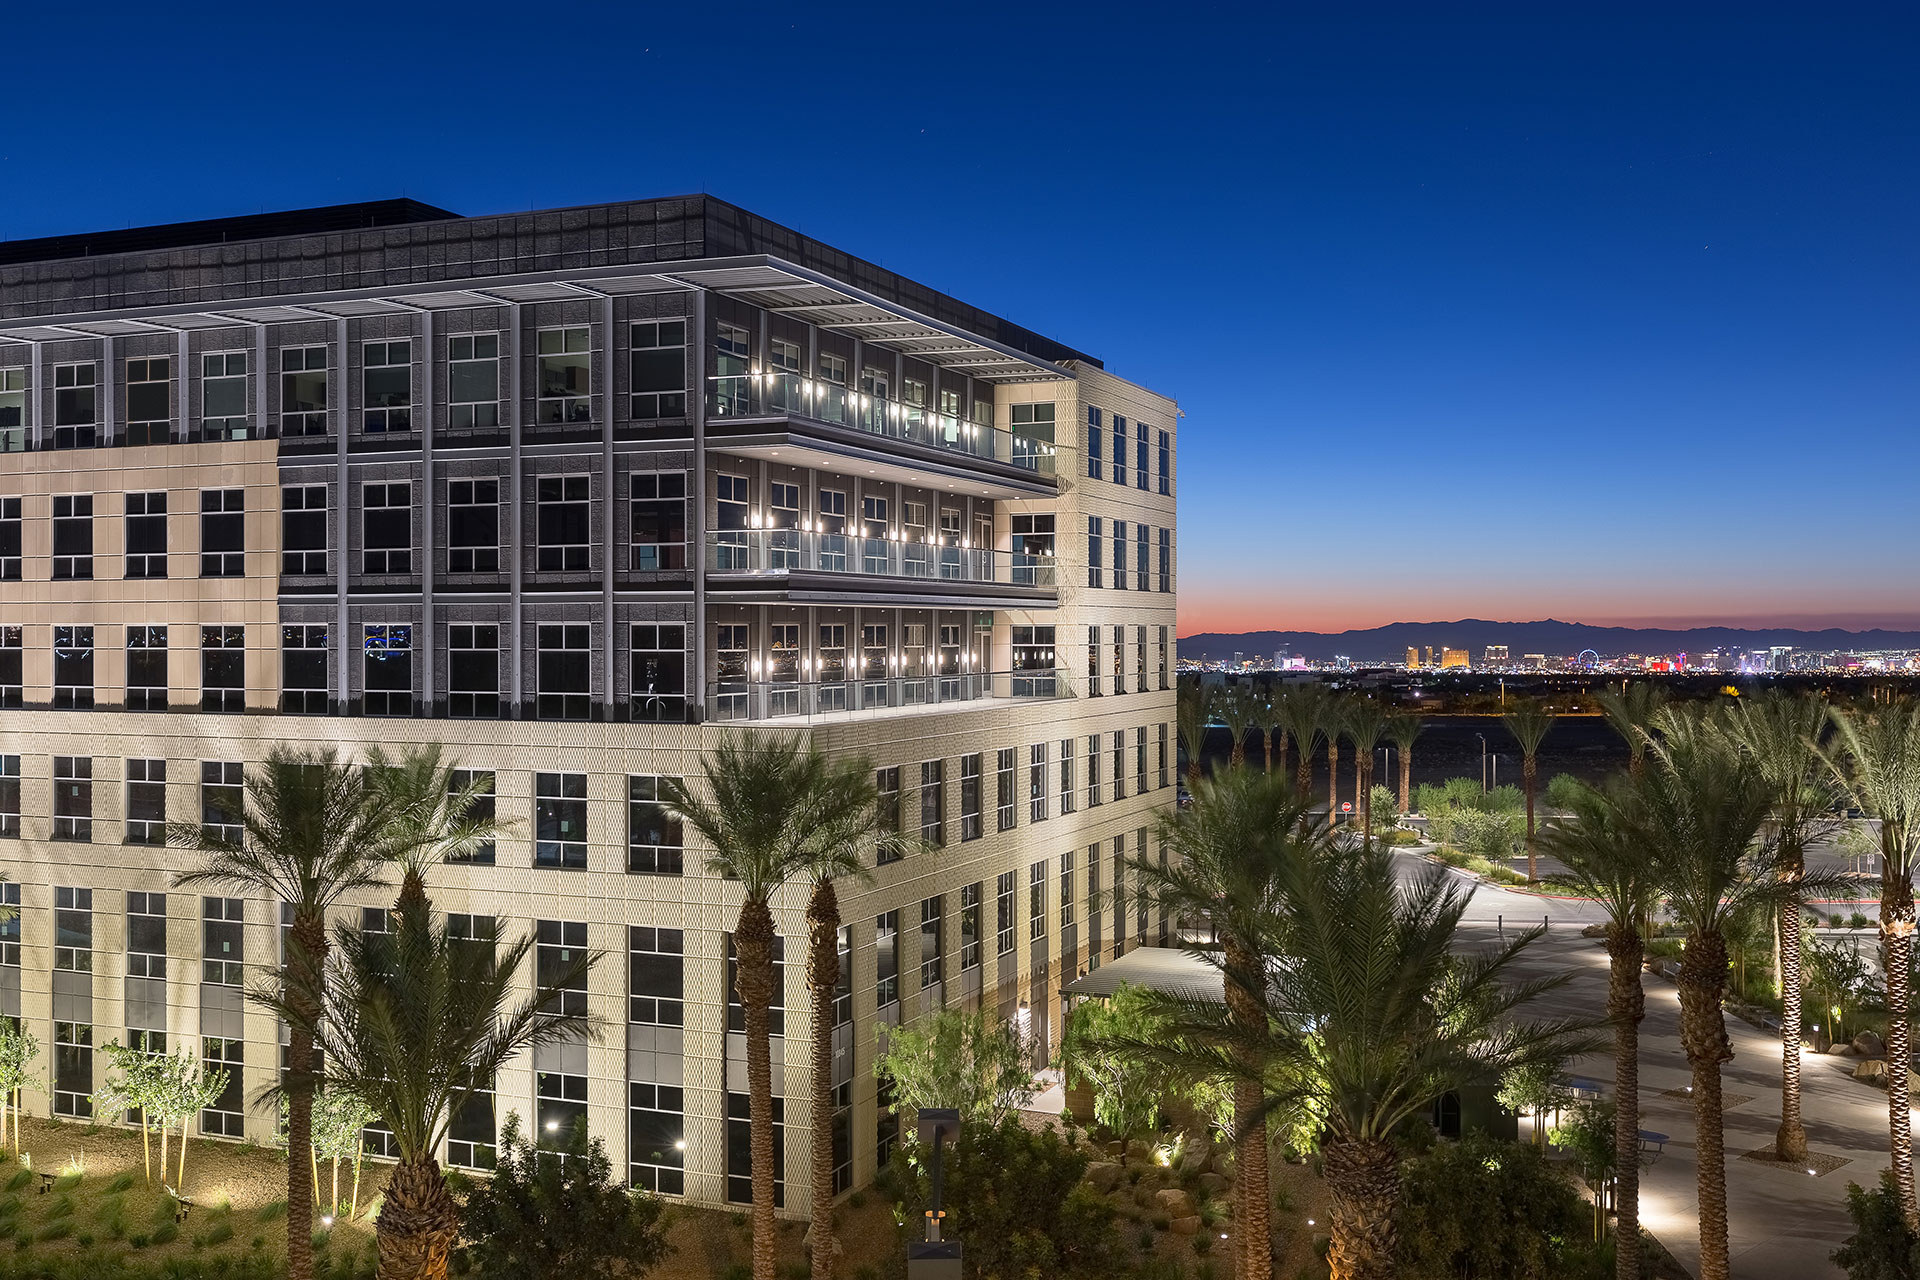 An off-centered perspective of a six-story office building at twilight with beige and grey exterior, three glass balconies, with palm trees and desert lanscaping in the foreground with rich blue skies and the Las Vegas Strip in the background.